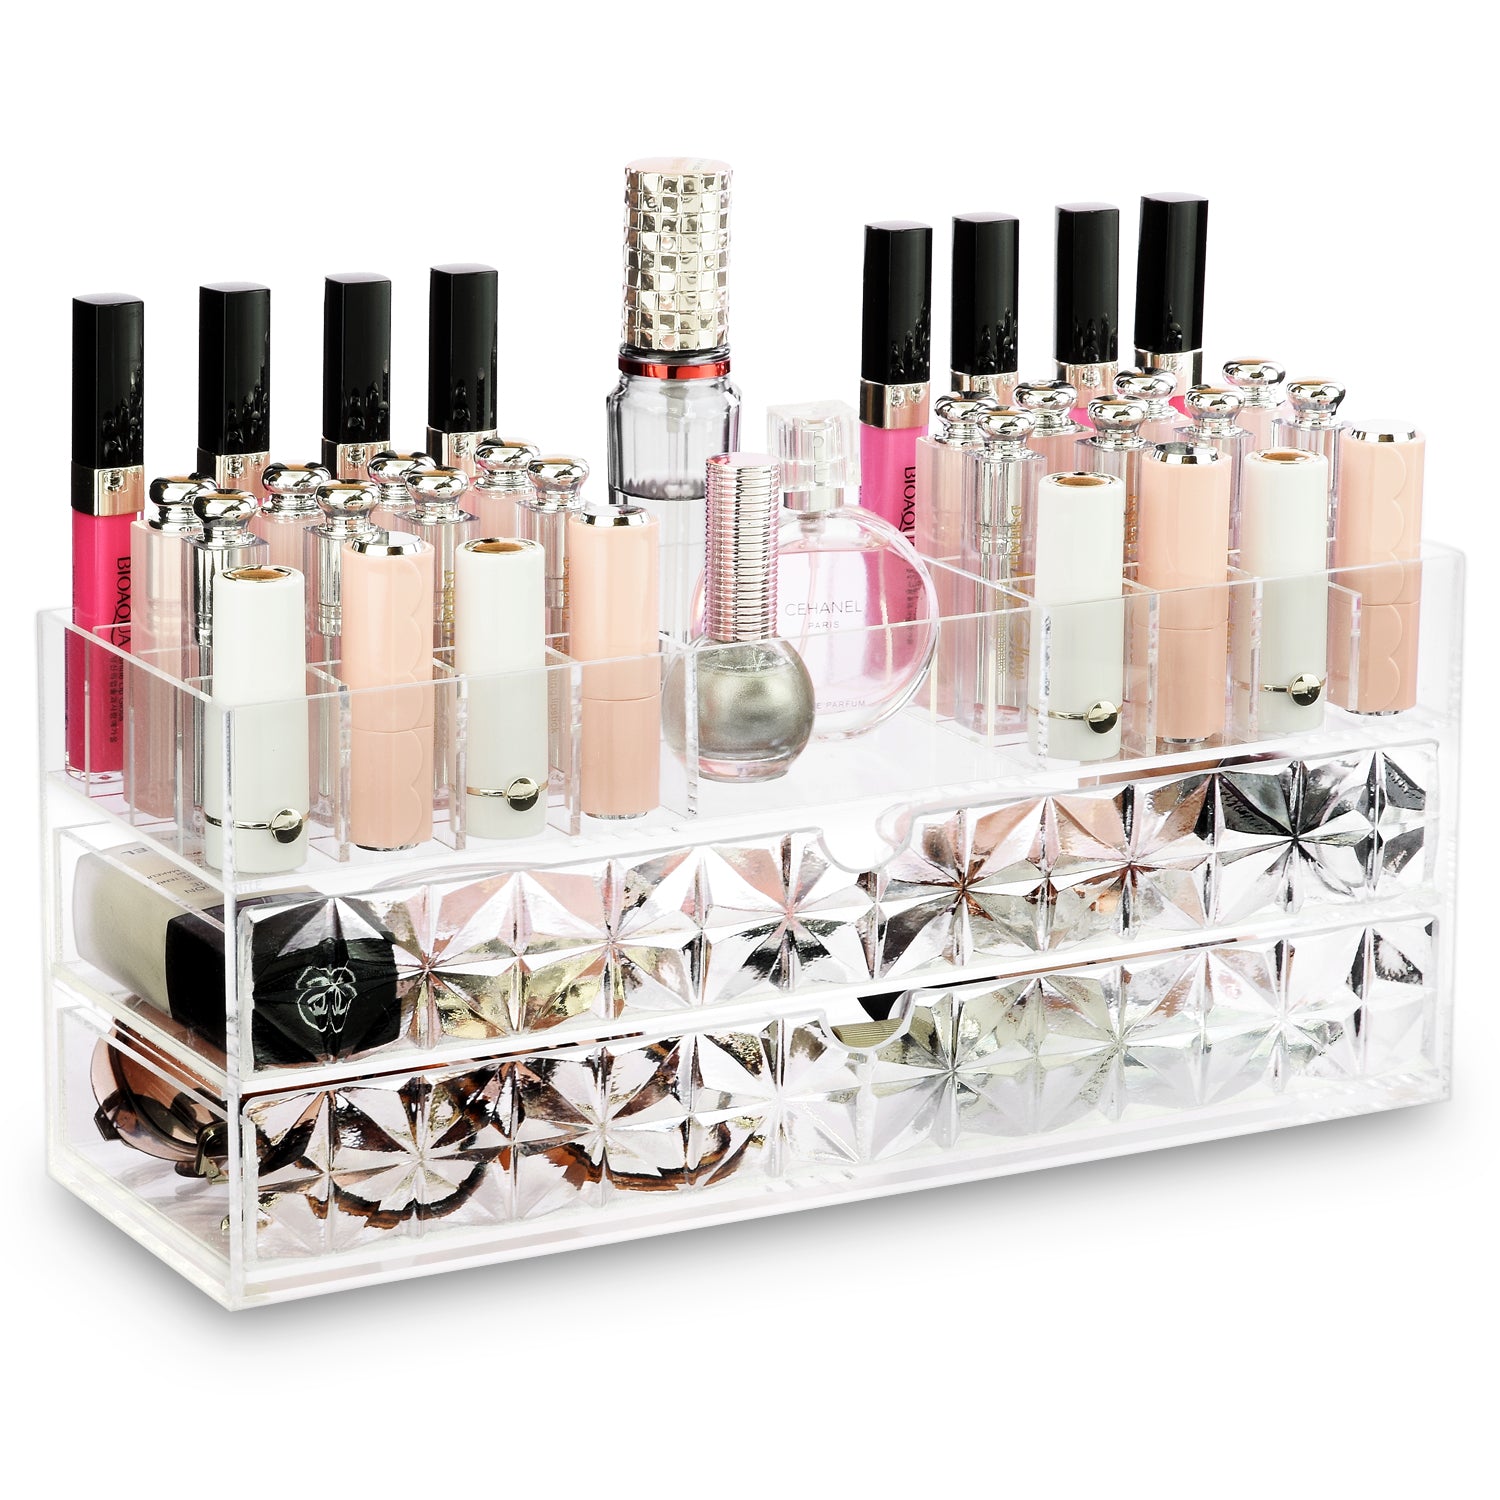 Makeup Storage With The eDiva Acrylic Organizer! (Collab post with Cosmetic  Sanctuary) - Love for Lacquer